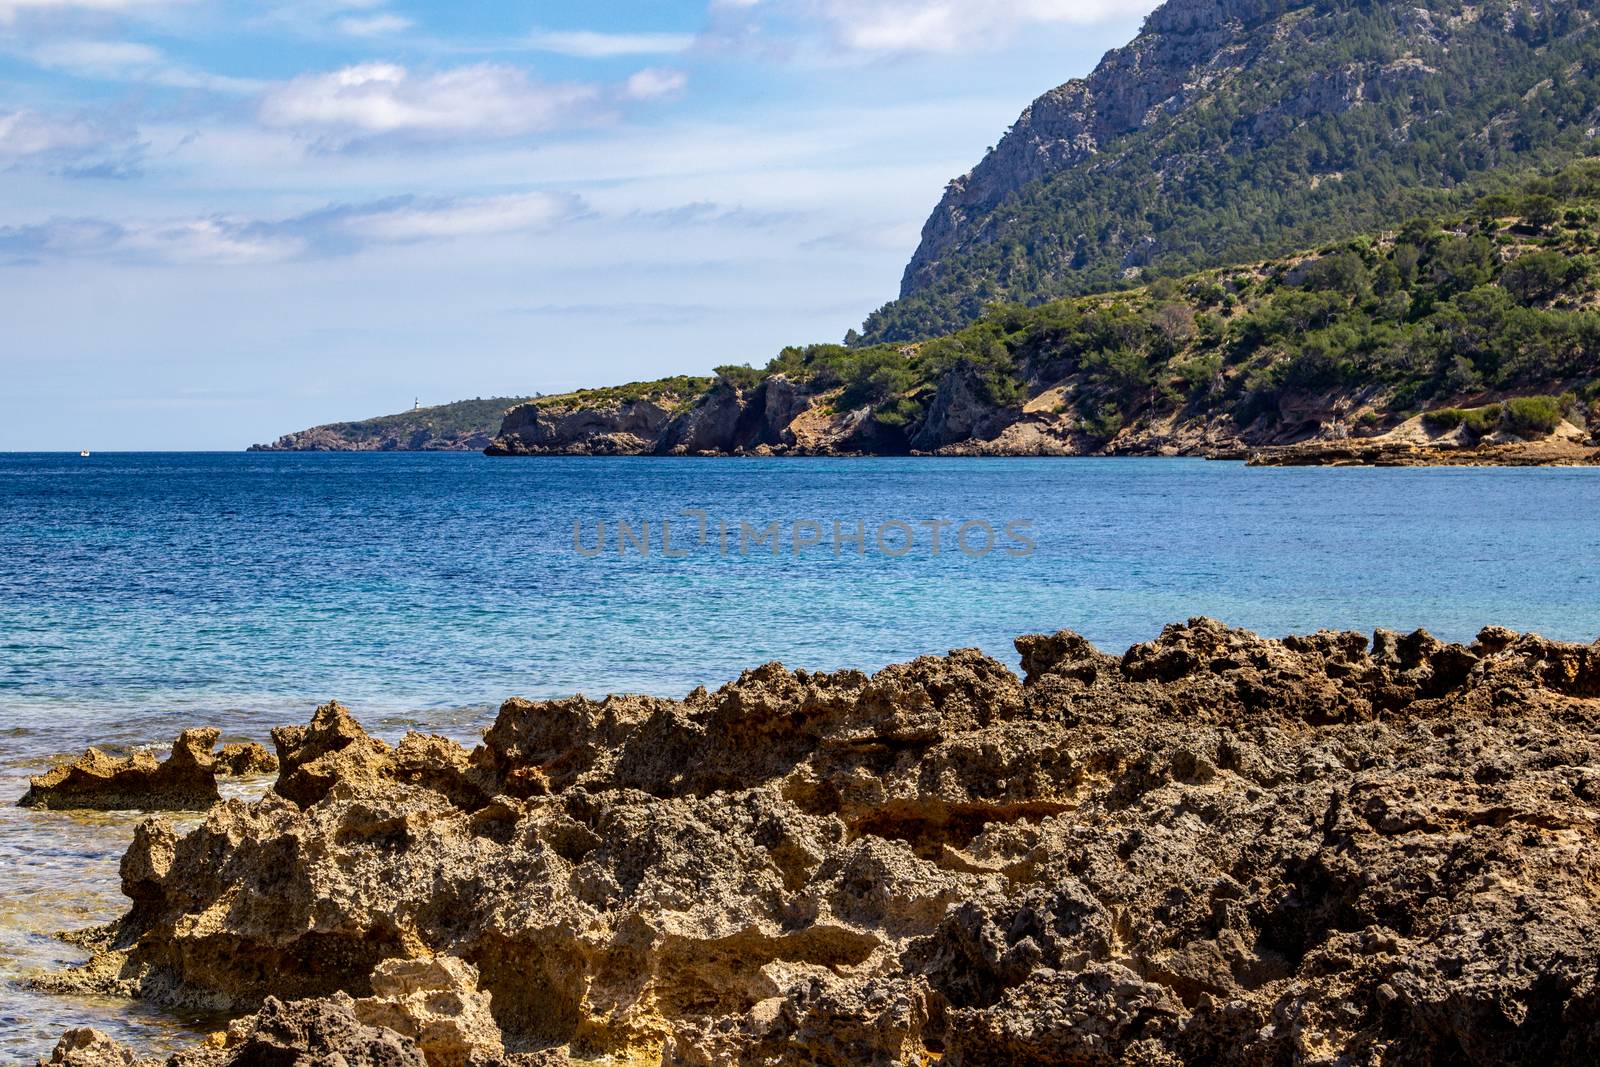 Bay on the peninsula La Victoria, Mallorca with ridge in the background, blue water and rocks in the sea